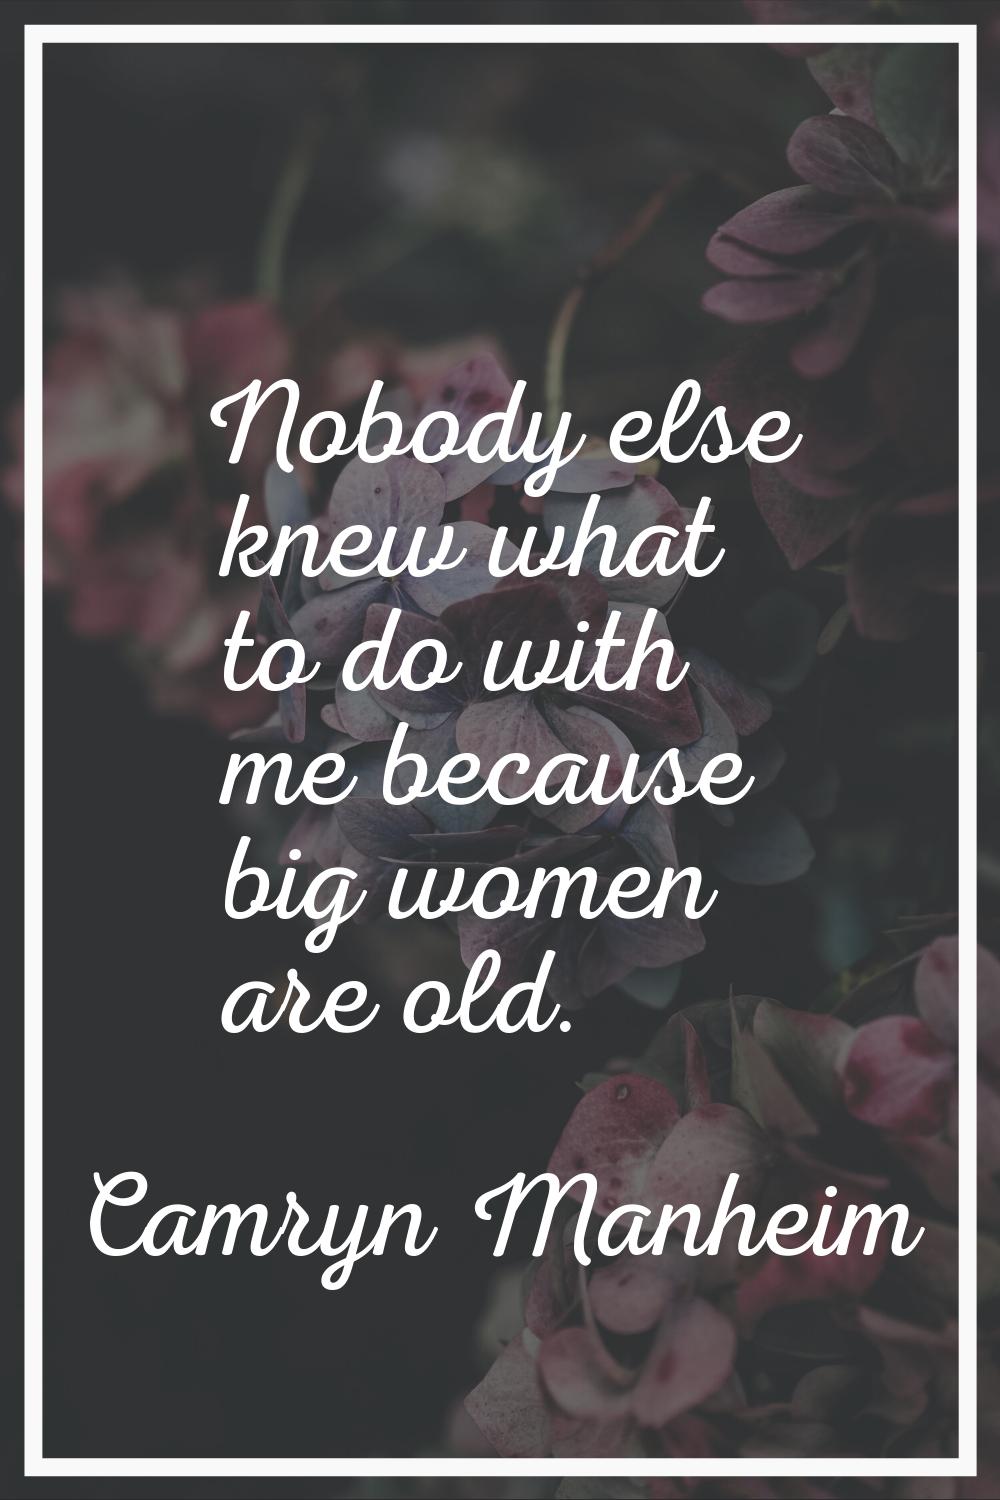 Nobody else knew what to do with me because big women are old.